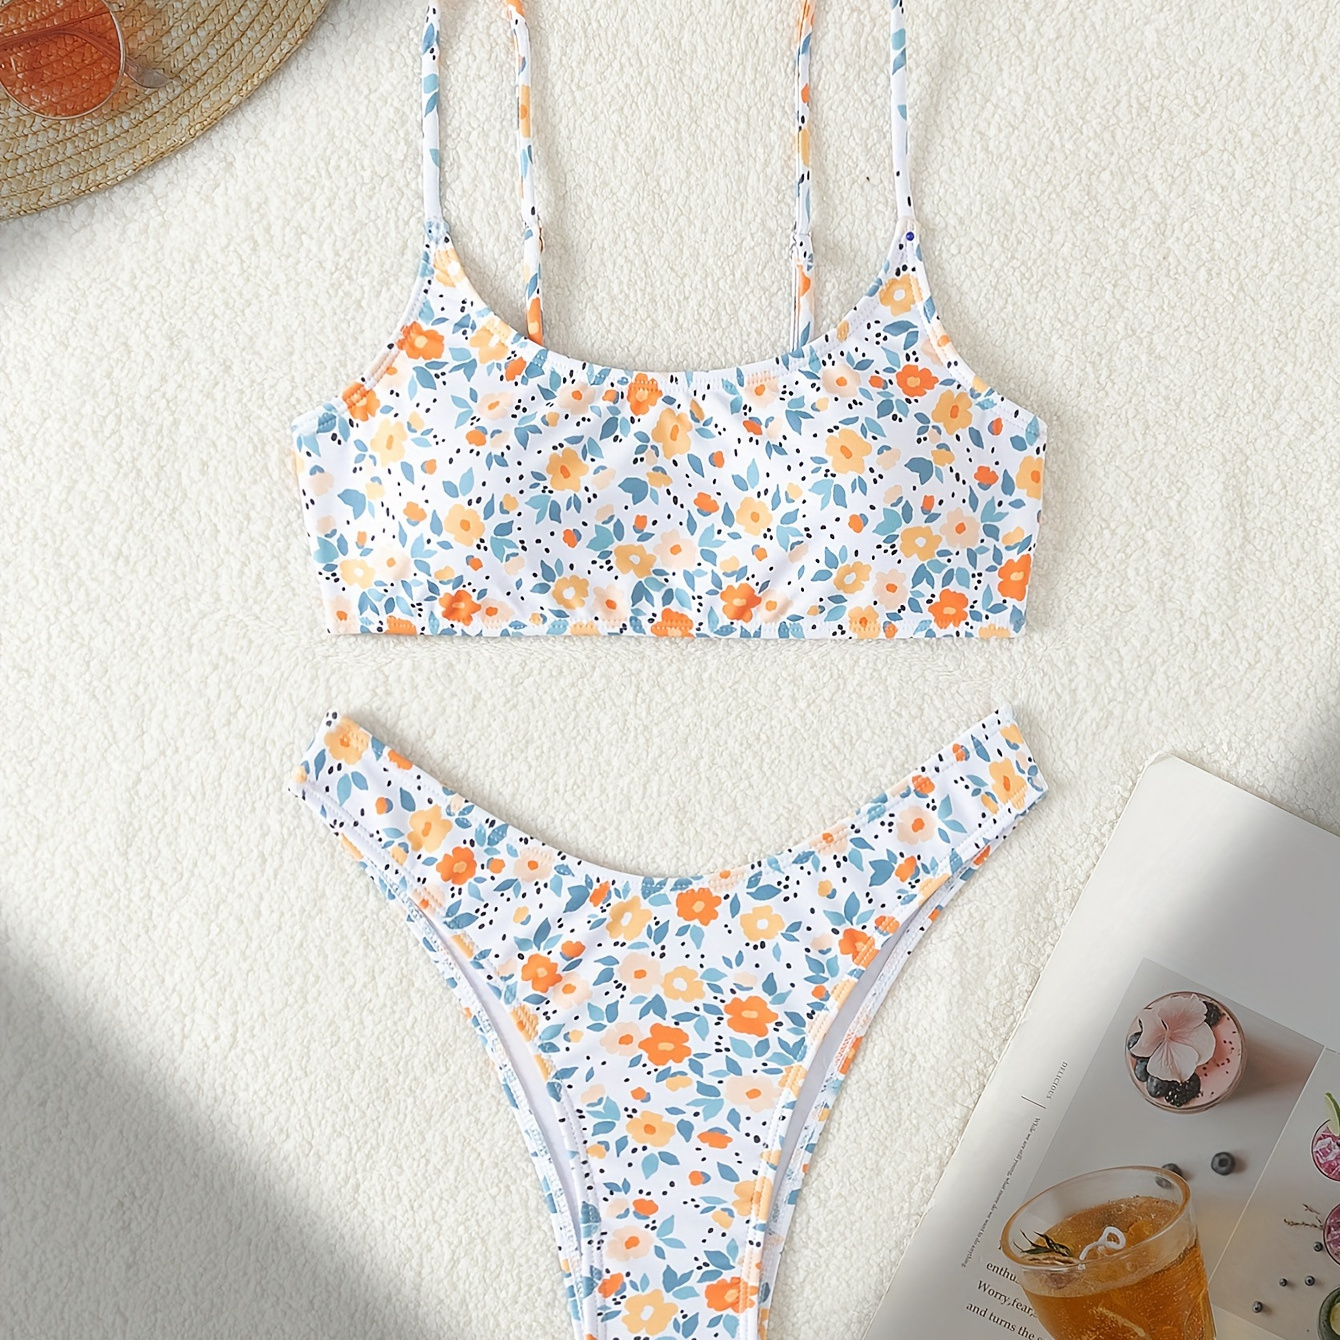 

Women's Floral Print Bikini Set, Two-piece Swimsuit With Adjustable Straps, Summer Beachwear, Quick-dry Stretch Fabric